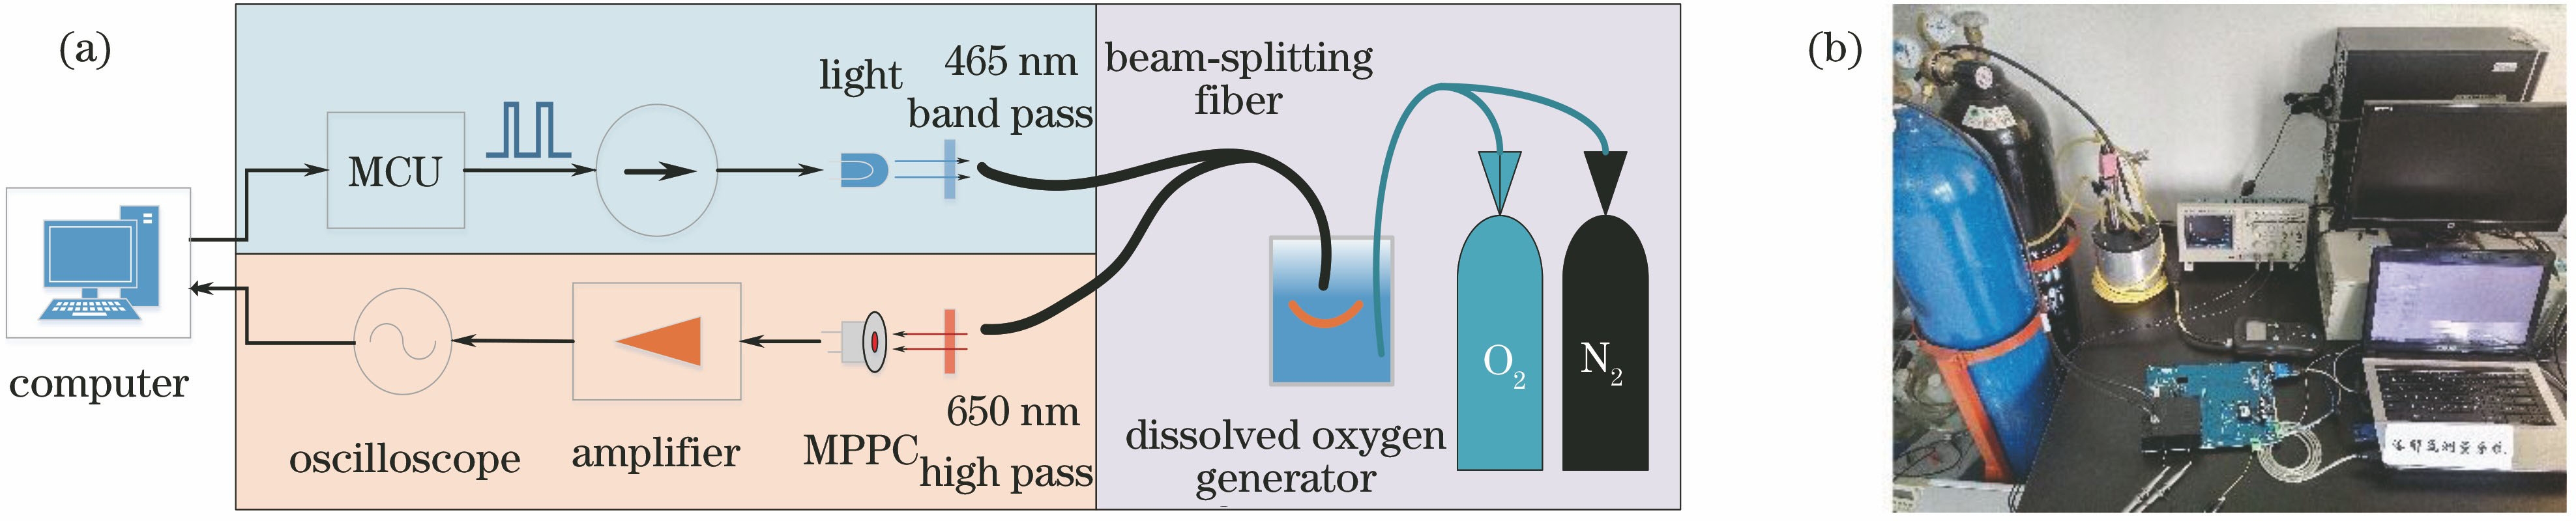 Time-domain fluorescence lifetime dissolved oxygen measurement system. (a) Schematic diagram; (b) picture of real products